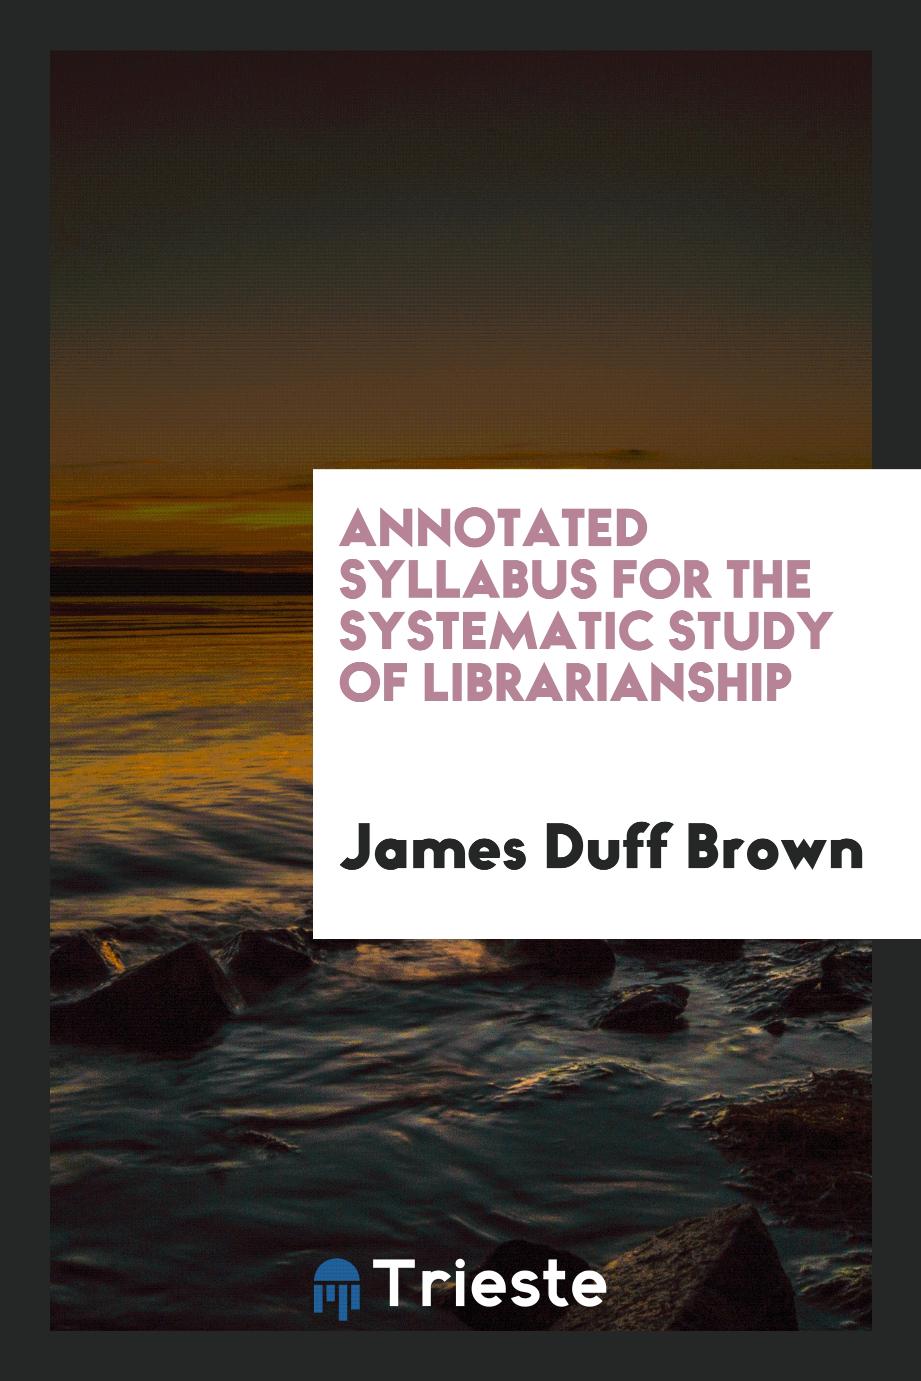 Annotated Syllabus for the Systematic Study of Librarianship